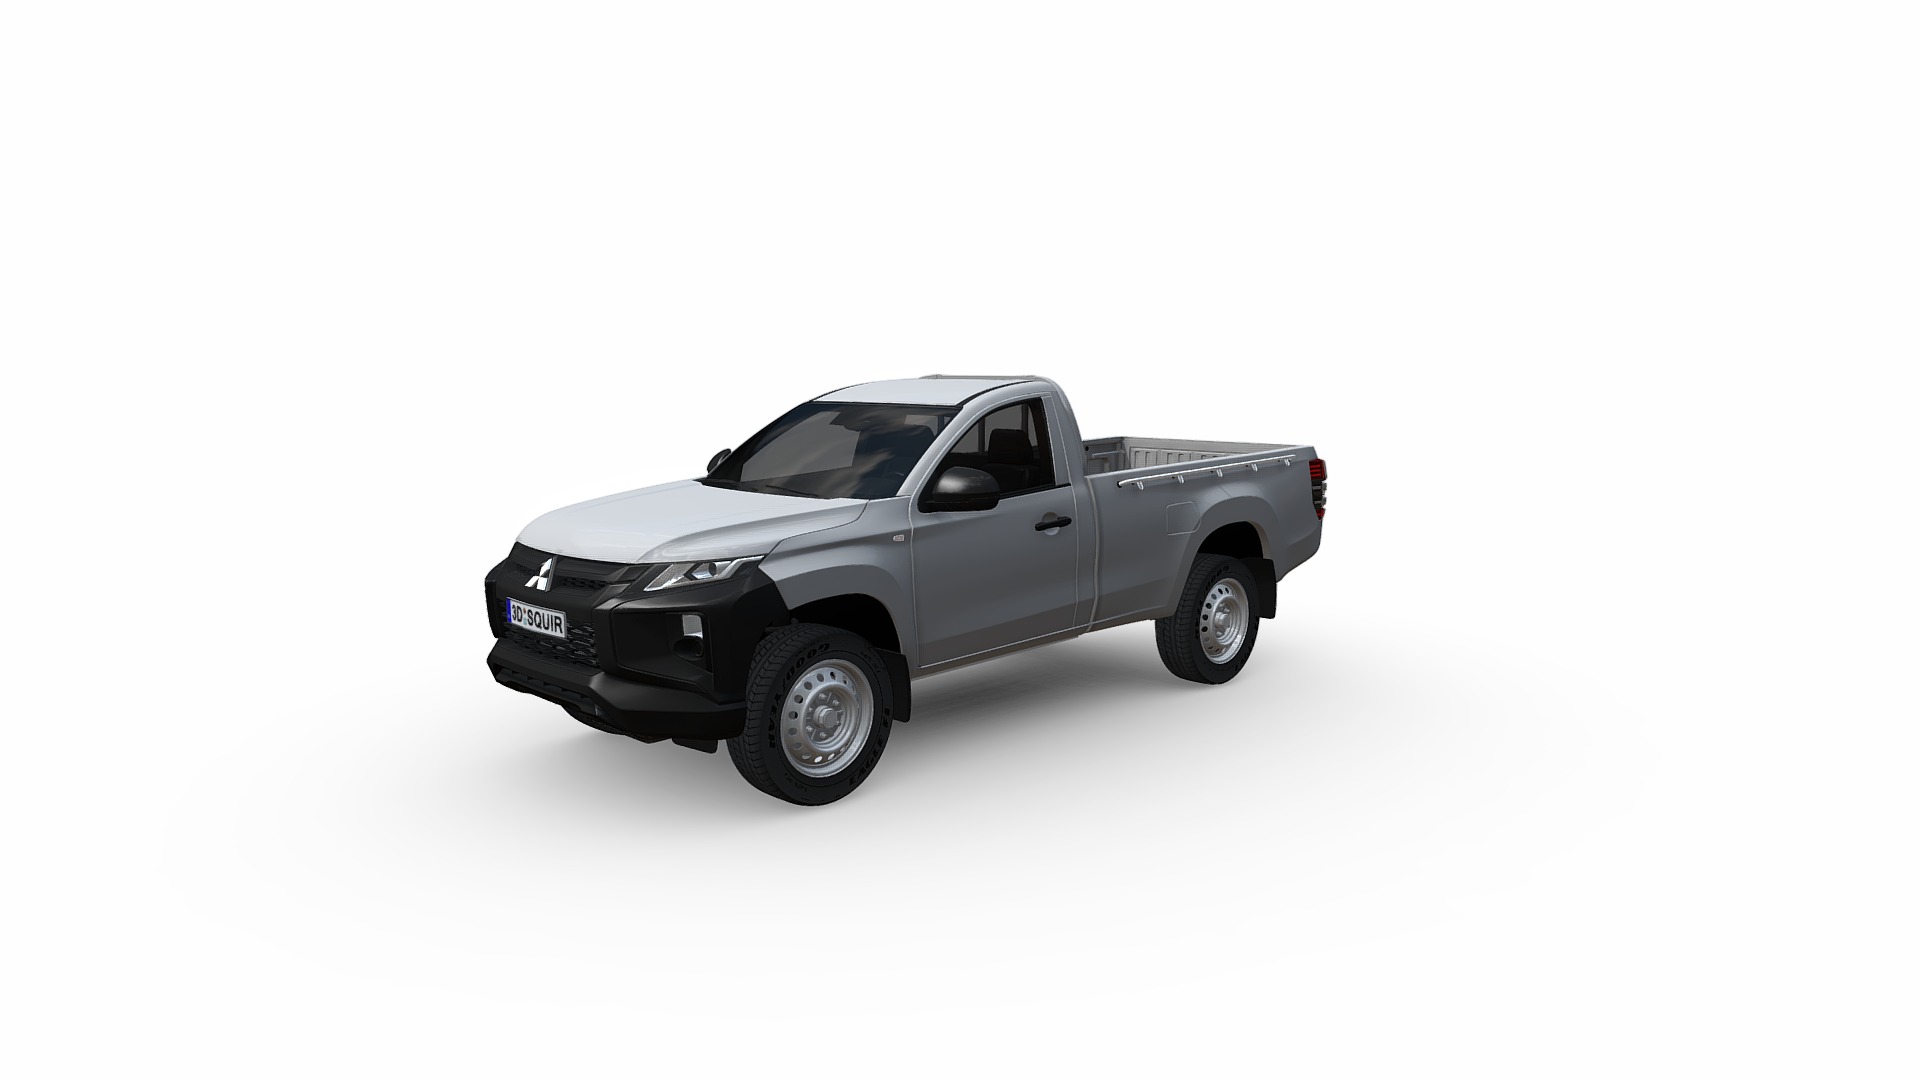 3D model Mitsubishi L200 Regular Cab 2019 - This is a 3D model of the Mitsubishi L200 Regular Cab 2019. The 3D model is about a silver truck with a black top.